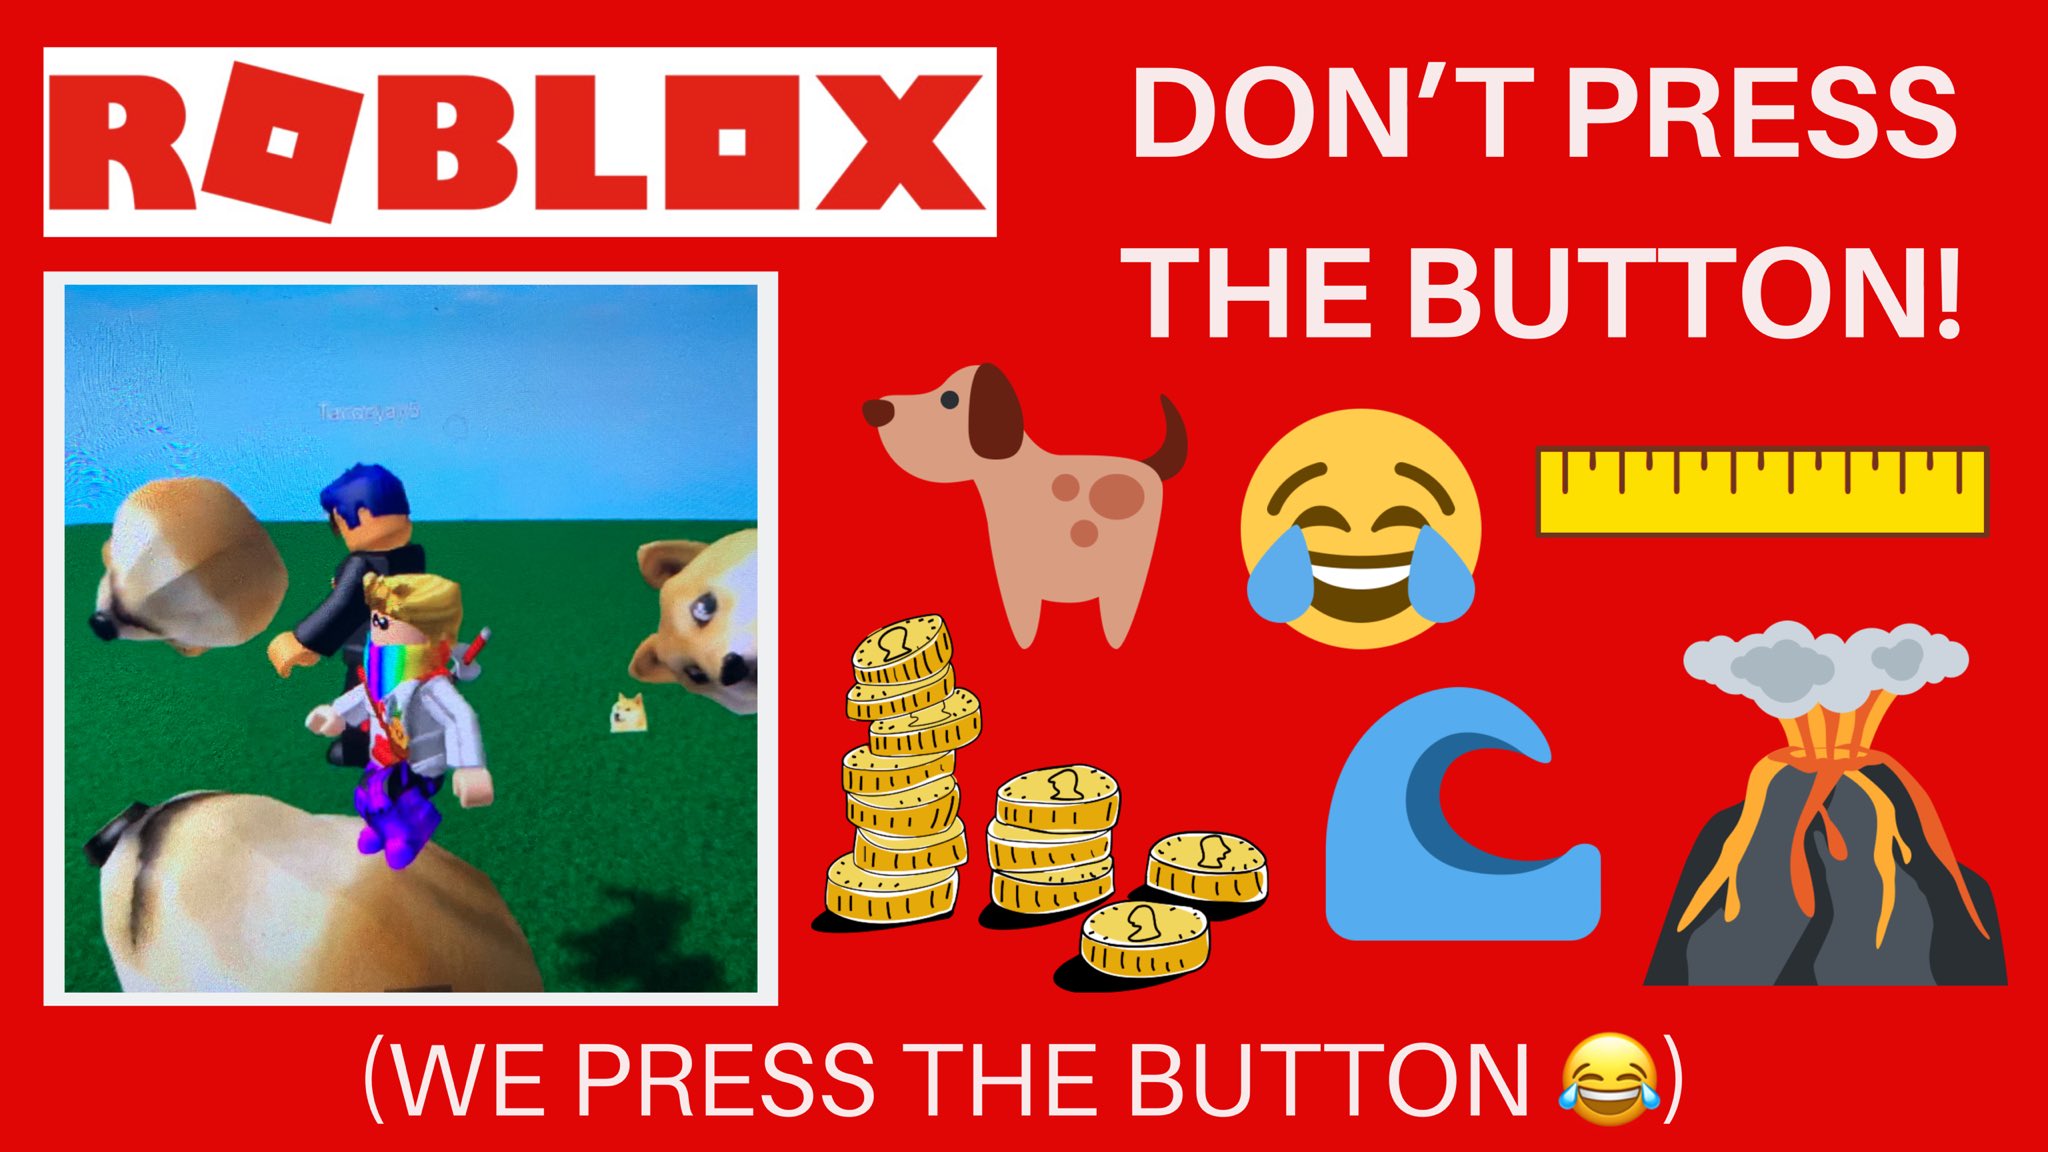 Deathbotbrothers On Twitter Roblox Don T Press The Button Gameplay Do Not Press The Button Really Https T Co Sfl6ndqh9t Via Youtube Roblox Robloxgameplay Dontpressthebutton Robloxdontpressthebutton Robloxdonotpressthebutton Robloxgames - dont press the roblox red button